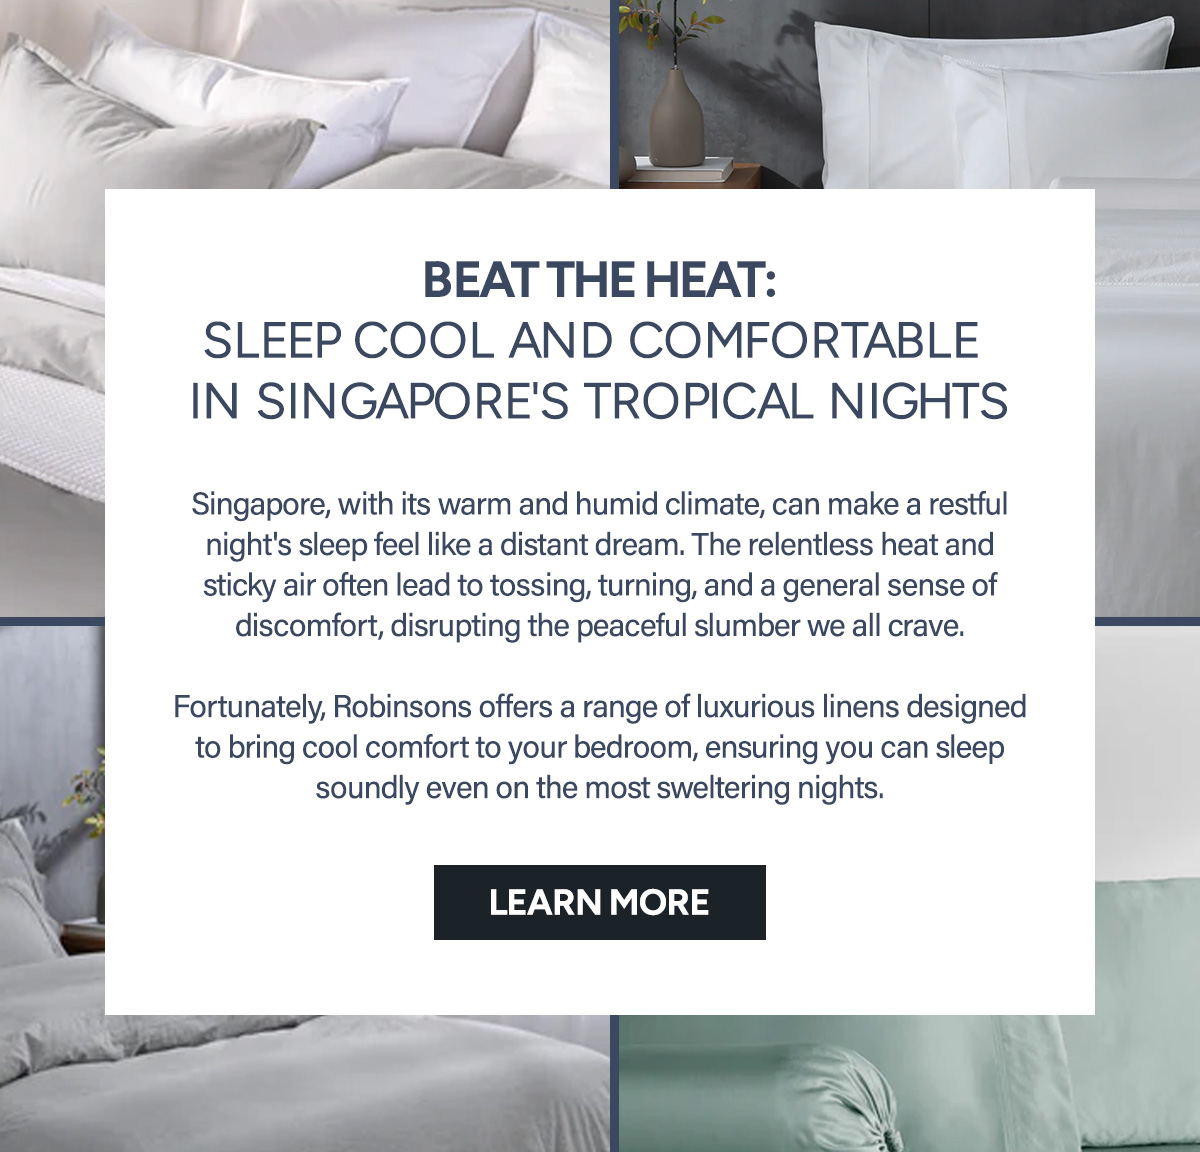 Beat the Heat: Sleep Cool and Comfortable in Singapore's Tropical Nights